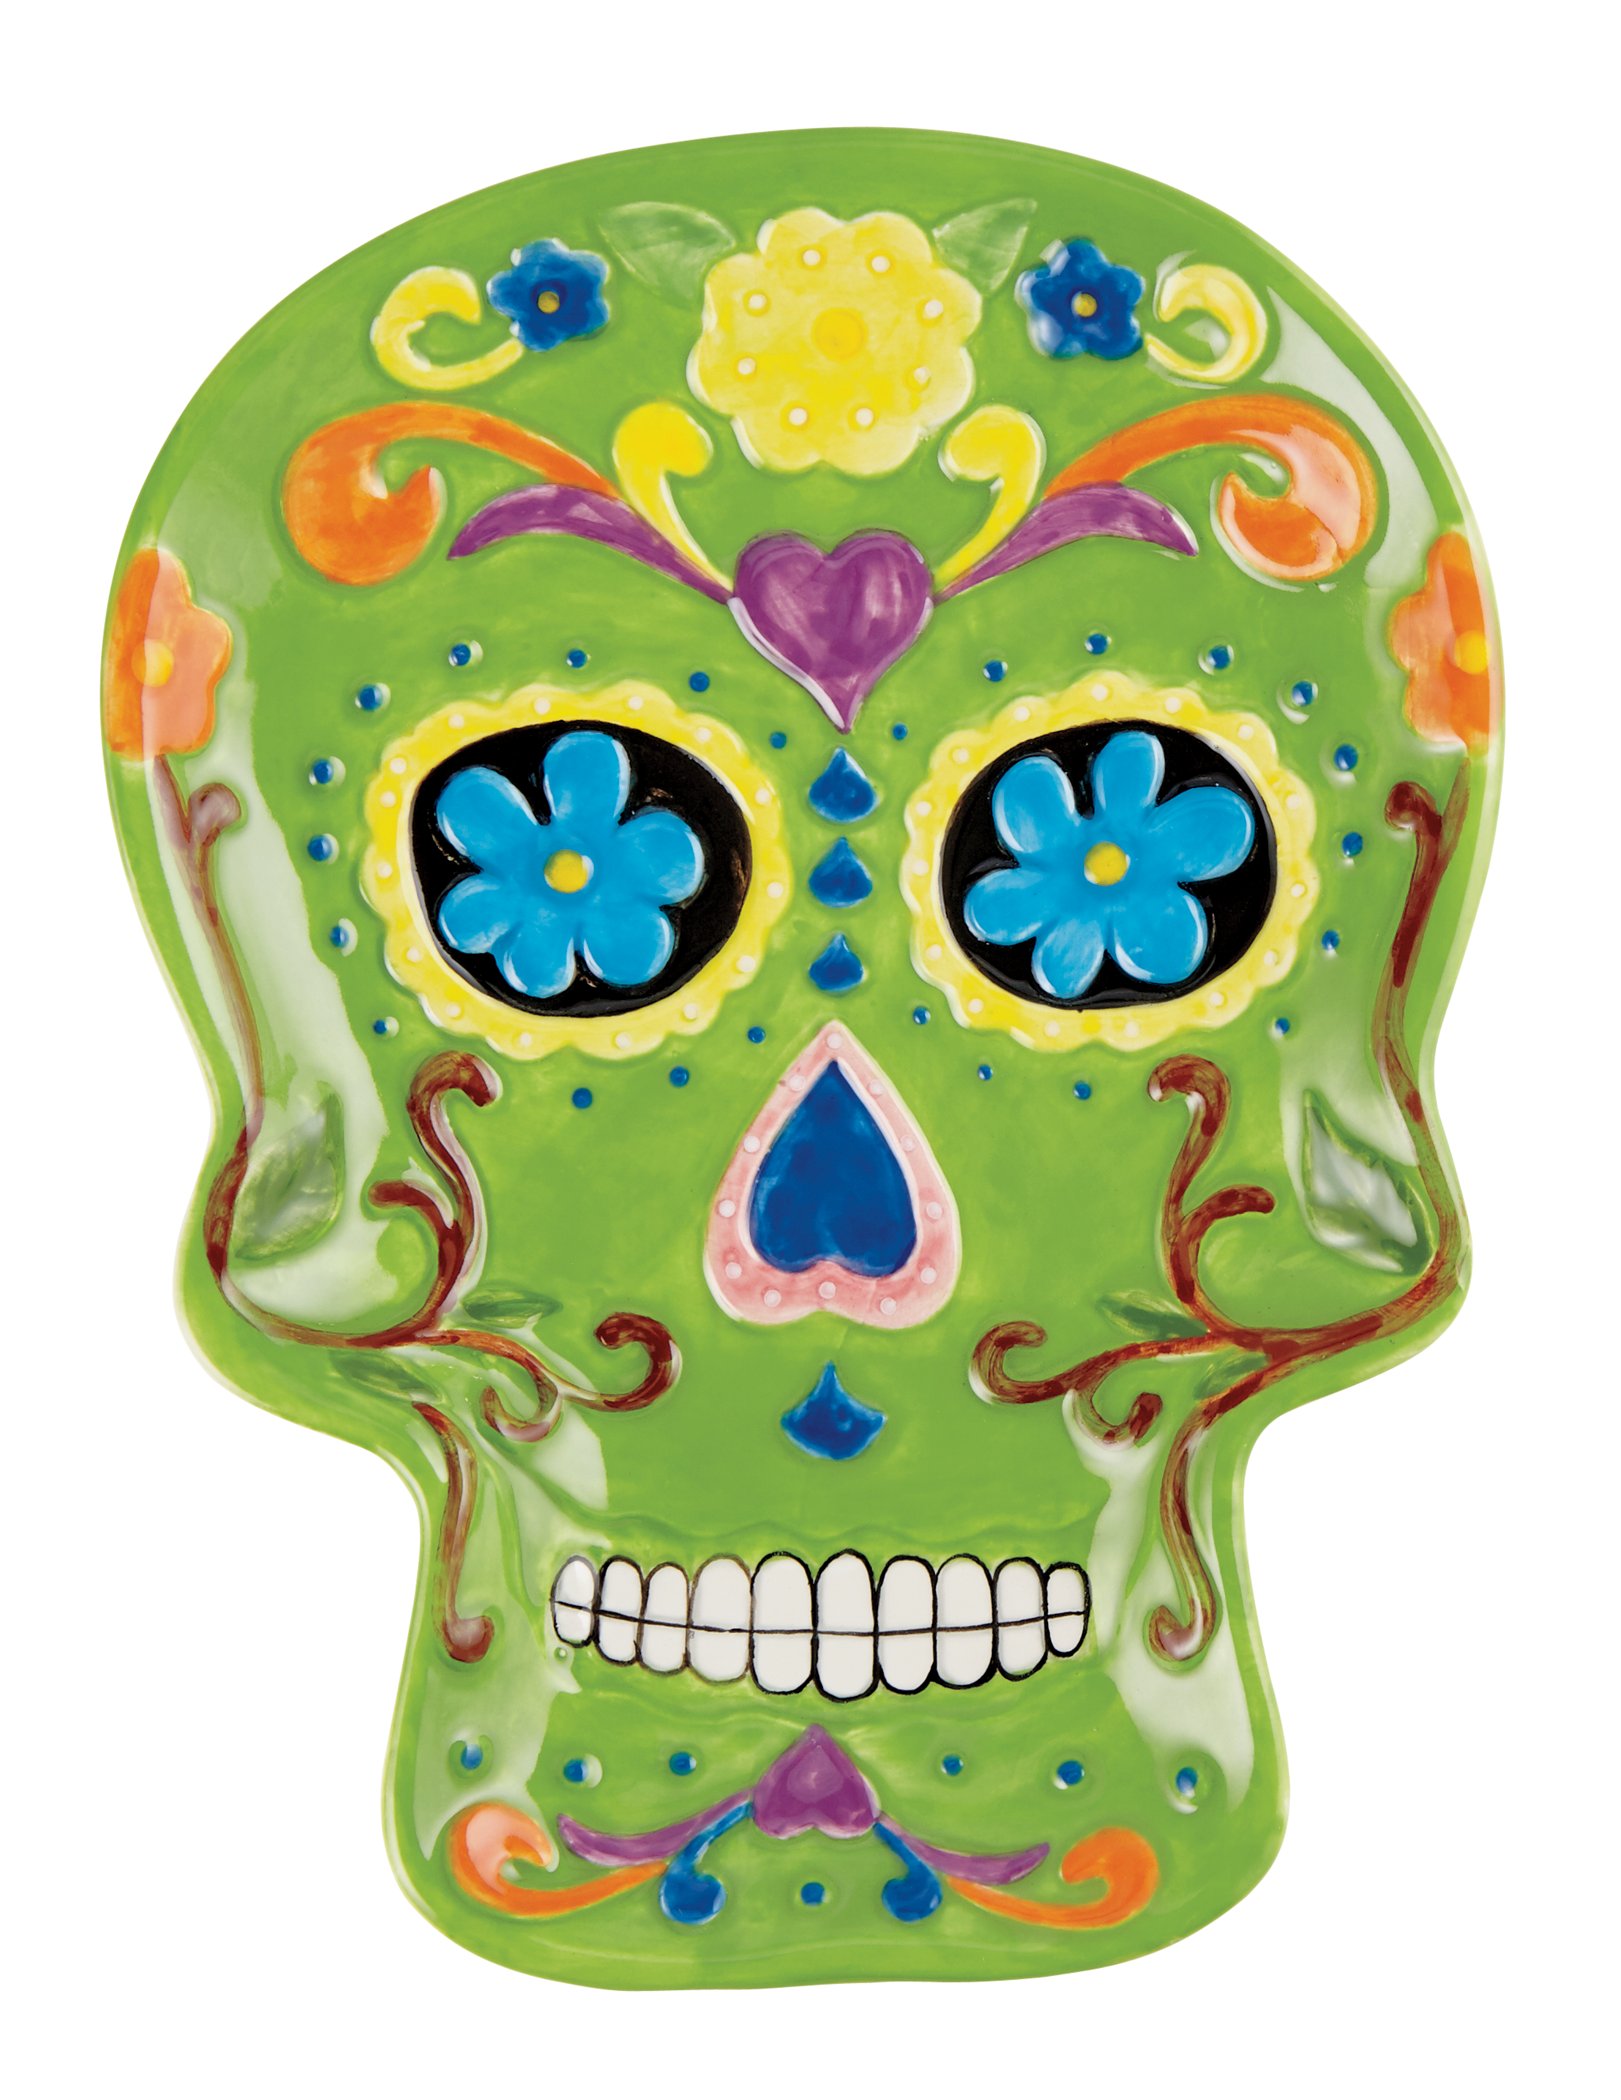 Holiday Market Day of the Dead Sugar Skull Candy Plate, Green - Shop ...